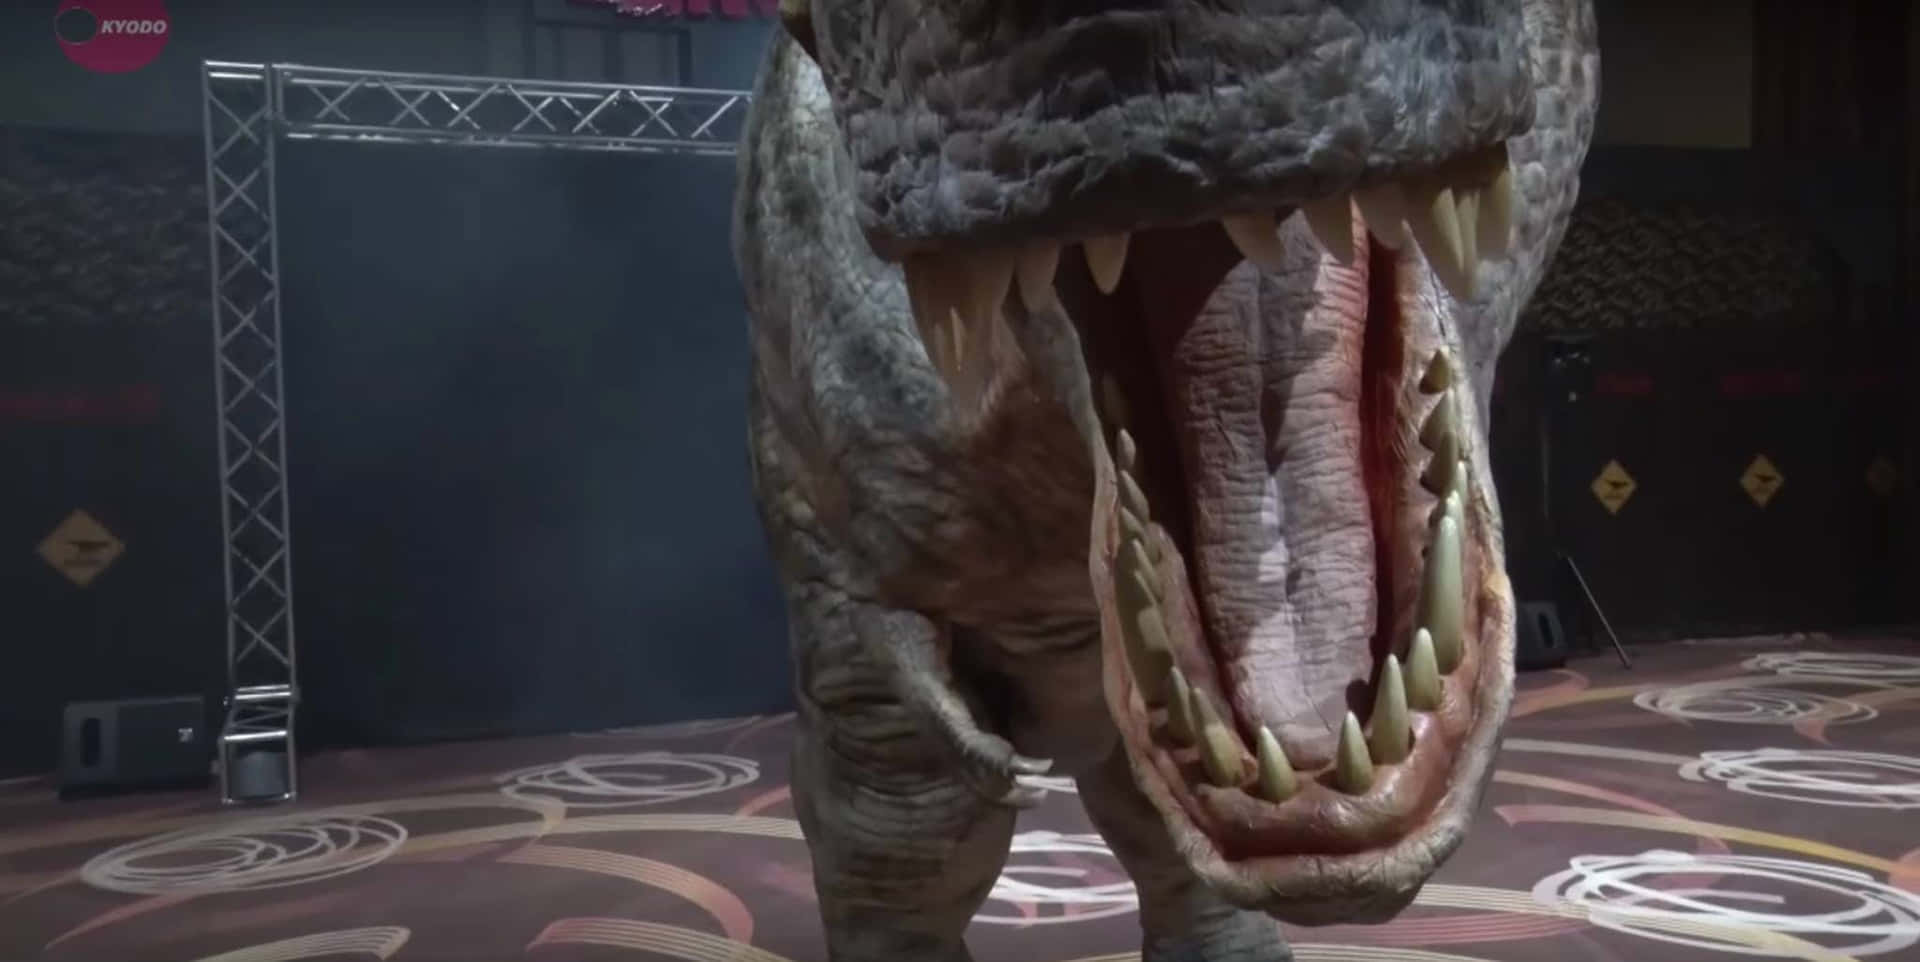 a t - rex with its mouth open in a room